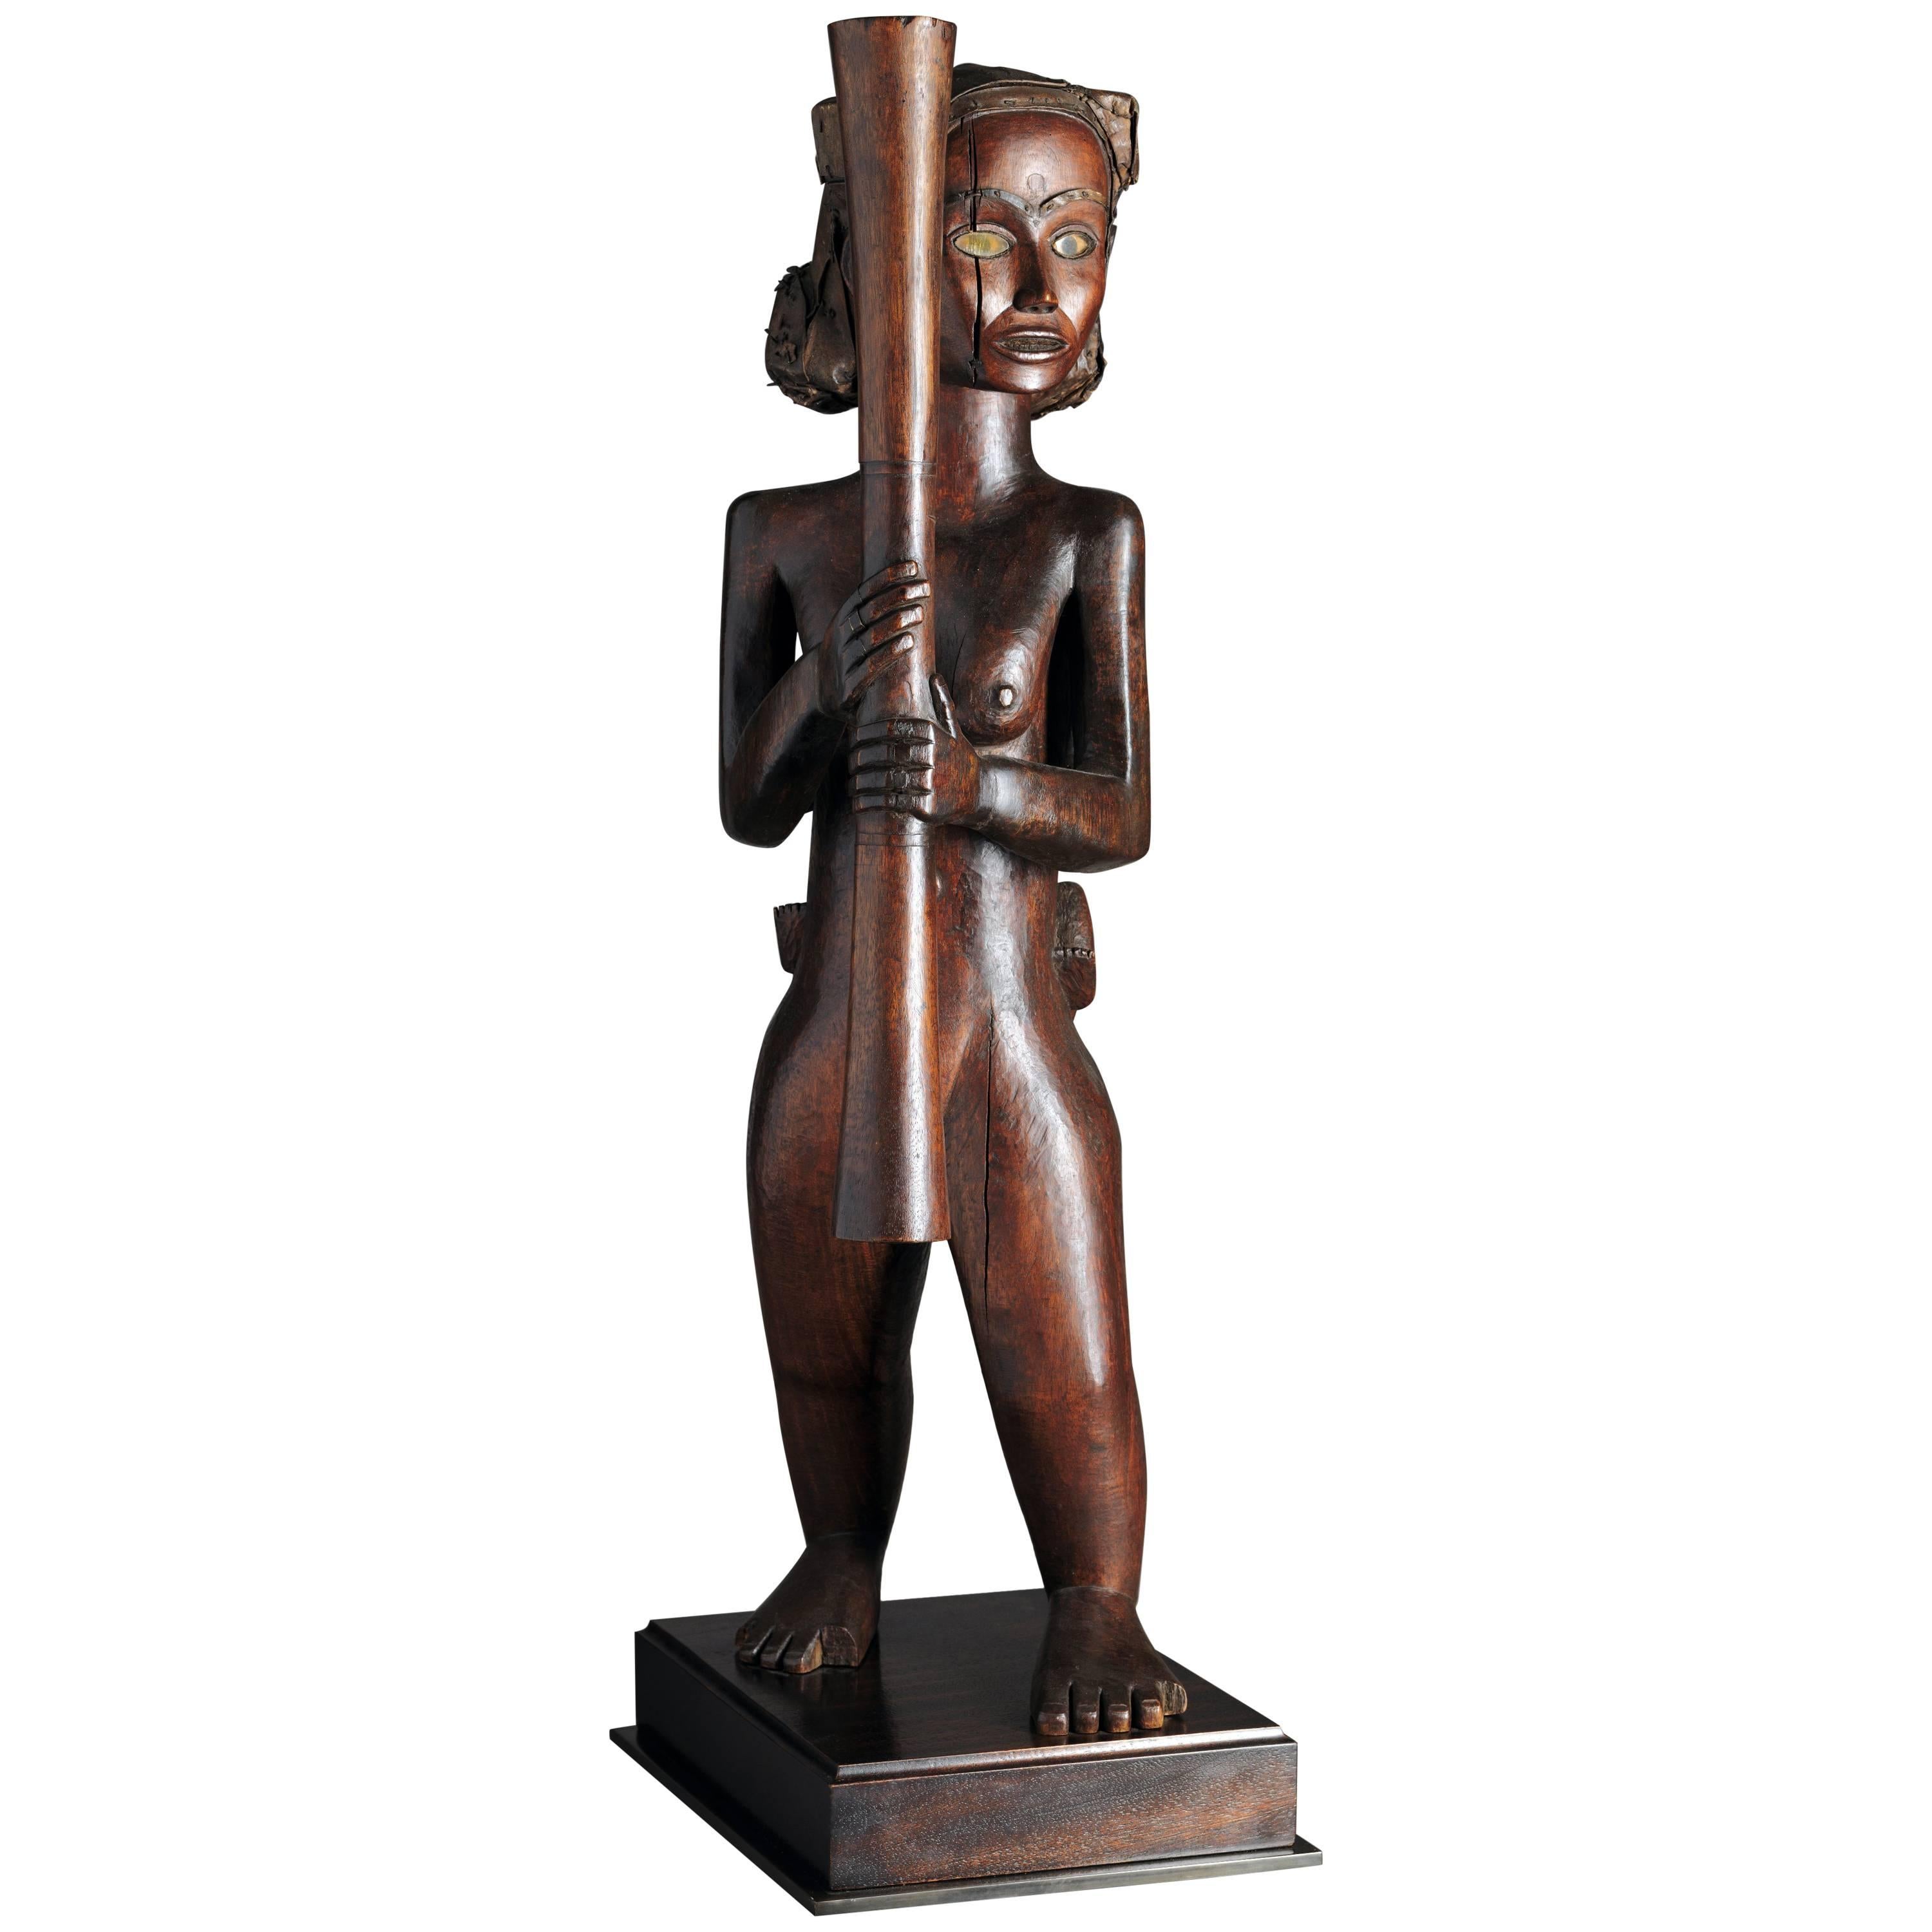 Mother and Child Sculpture, Cameroon, Mabea, 1920-1930, Provenance Ratton